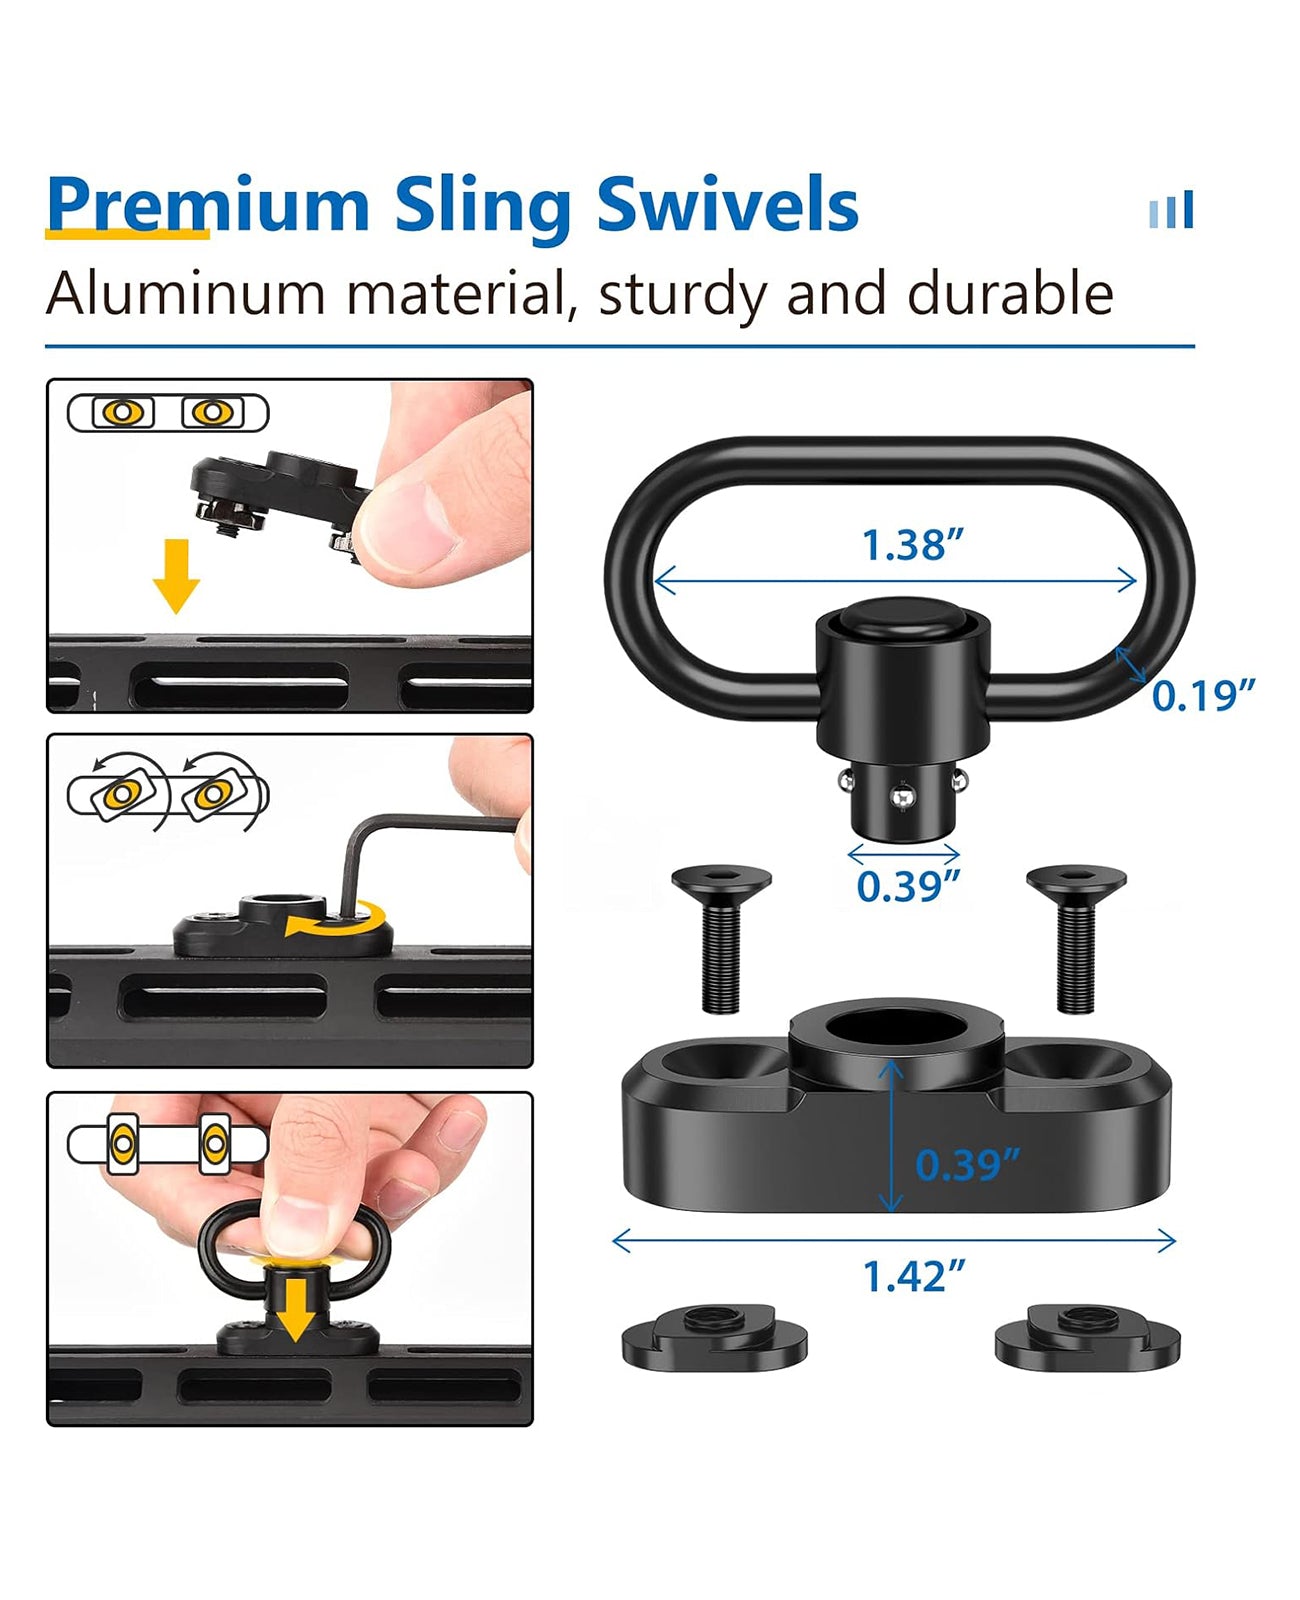 2 Point Sling with Premium Sling Swivels for M-rail